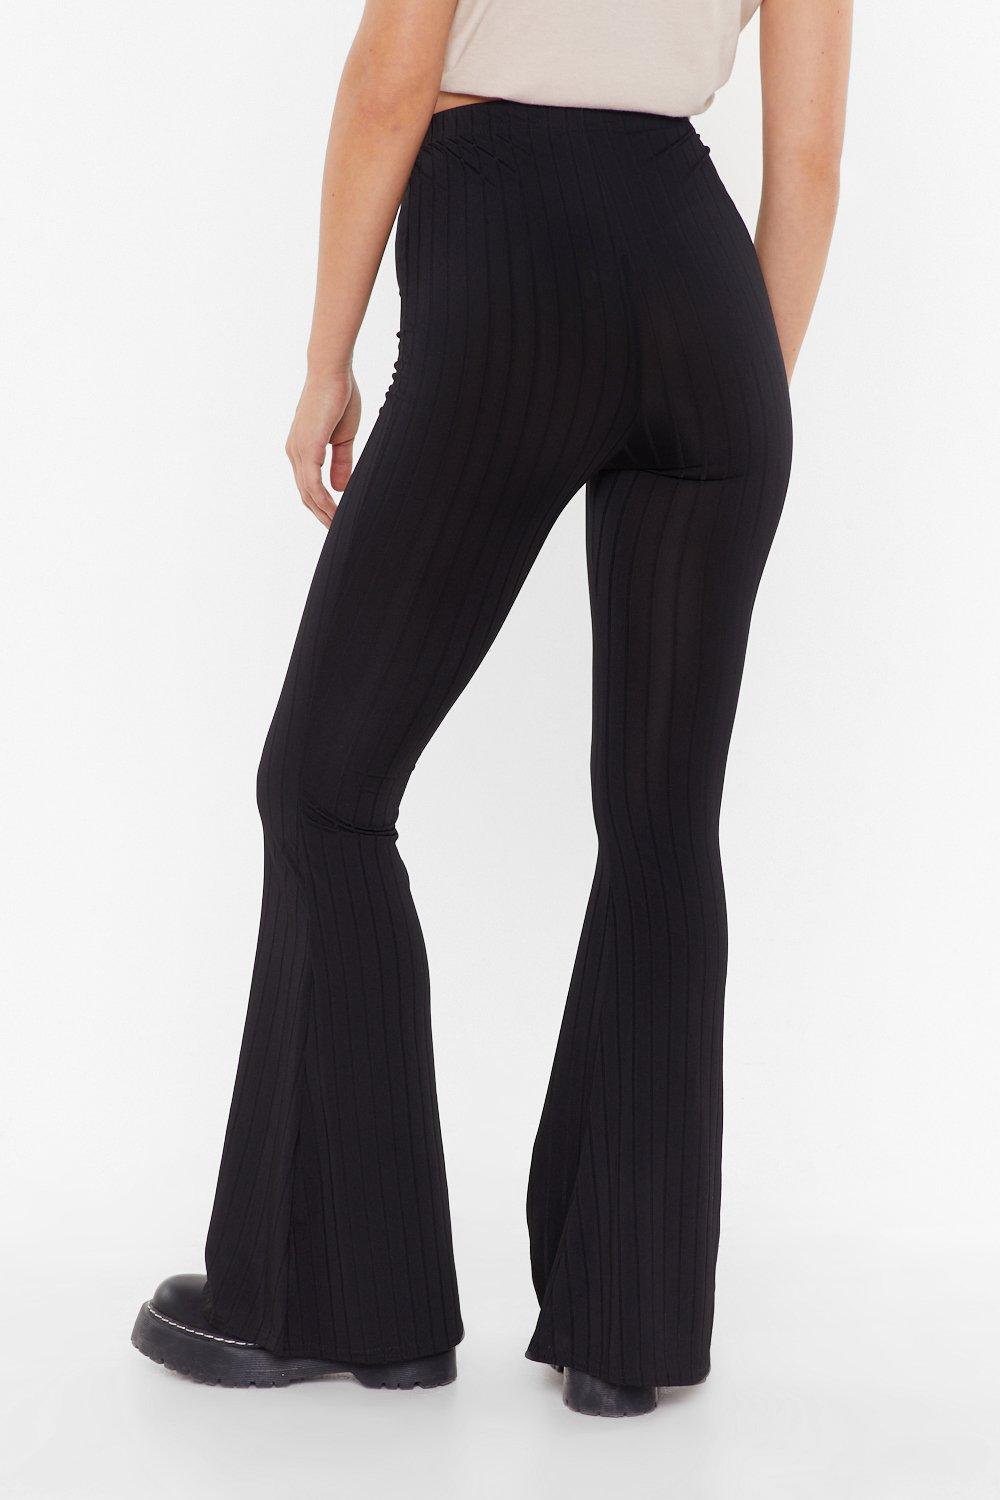 black flared high waisted trousers